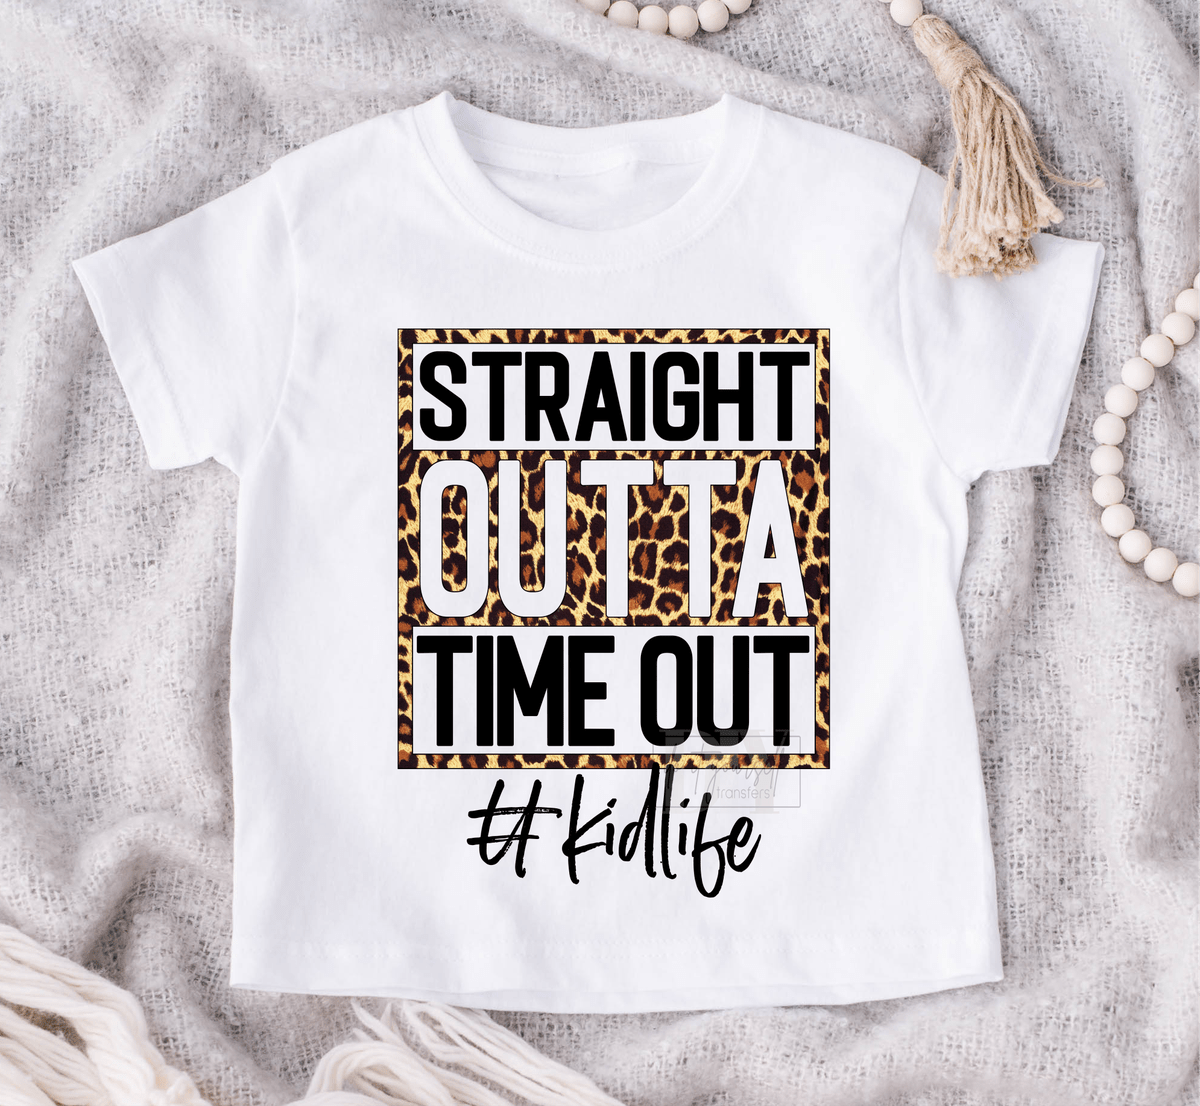 Straight outta time out #kidlife leopard frame size KIDS 7x9 DTF TRANSFERPRINT TO ORDER - Do it yourself Transfers